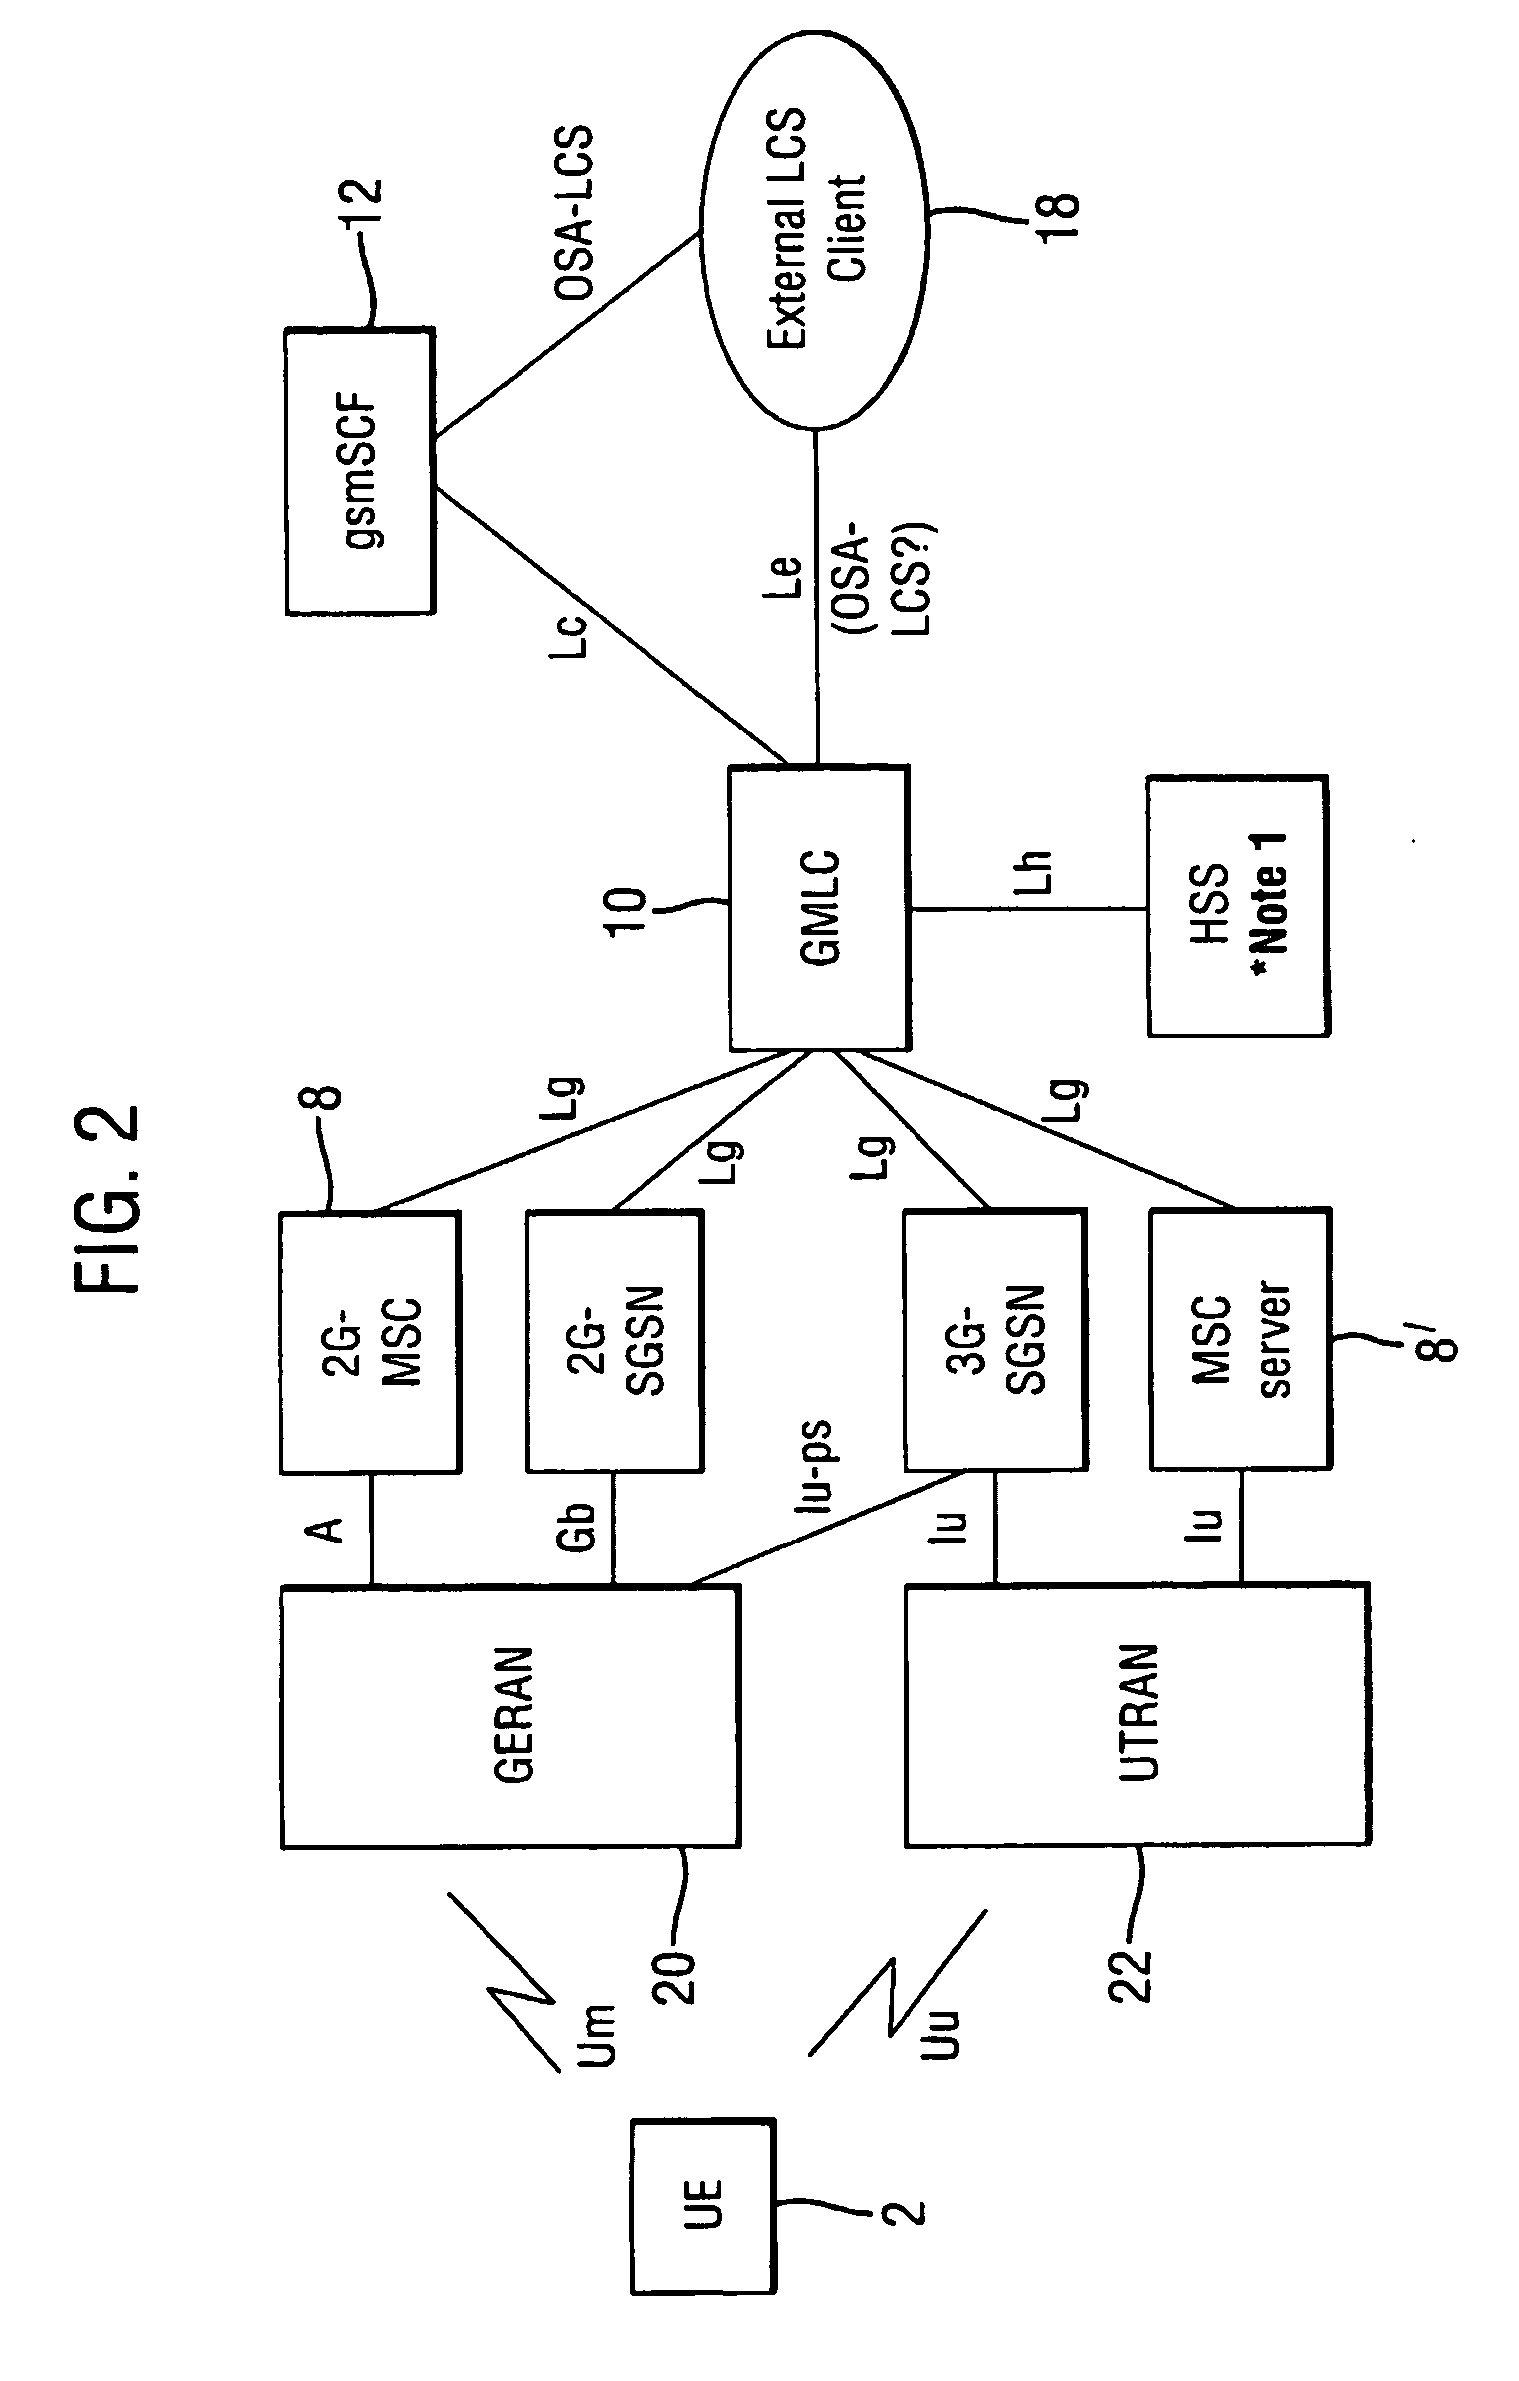 Method and system for establishing an emergency call in a communications system